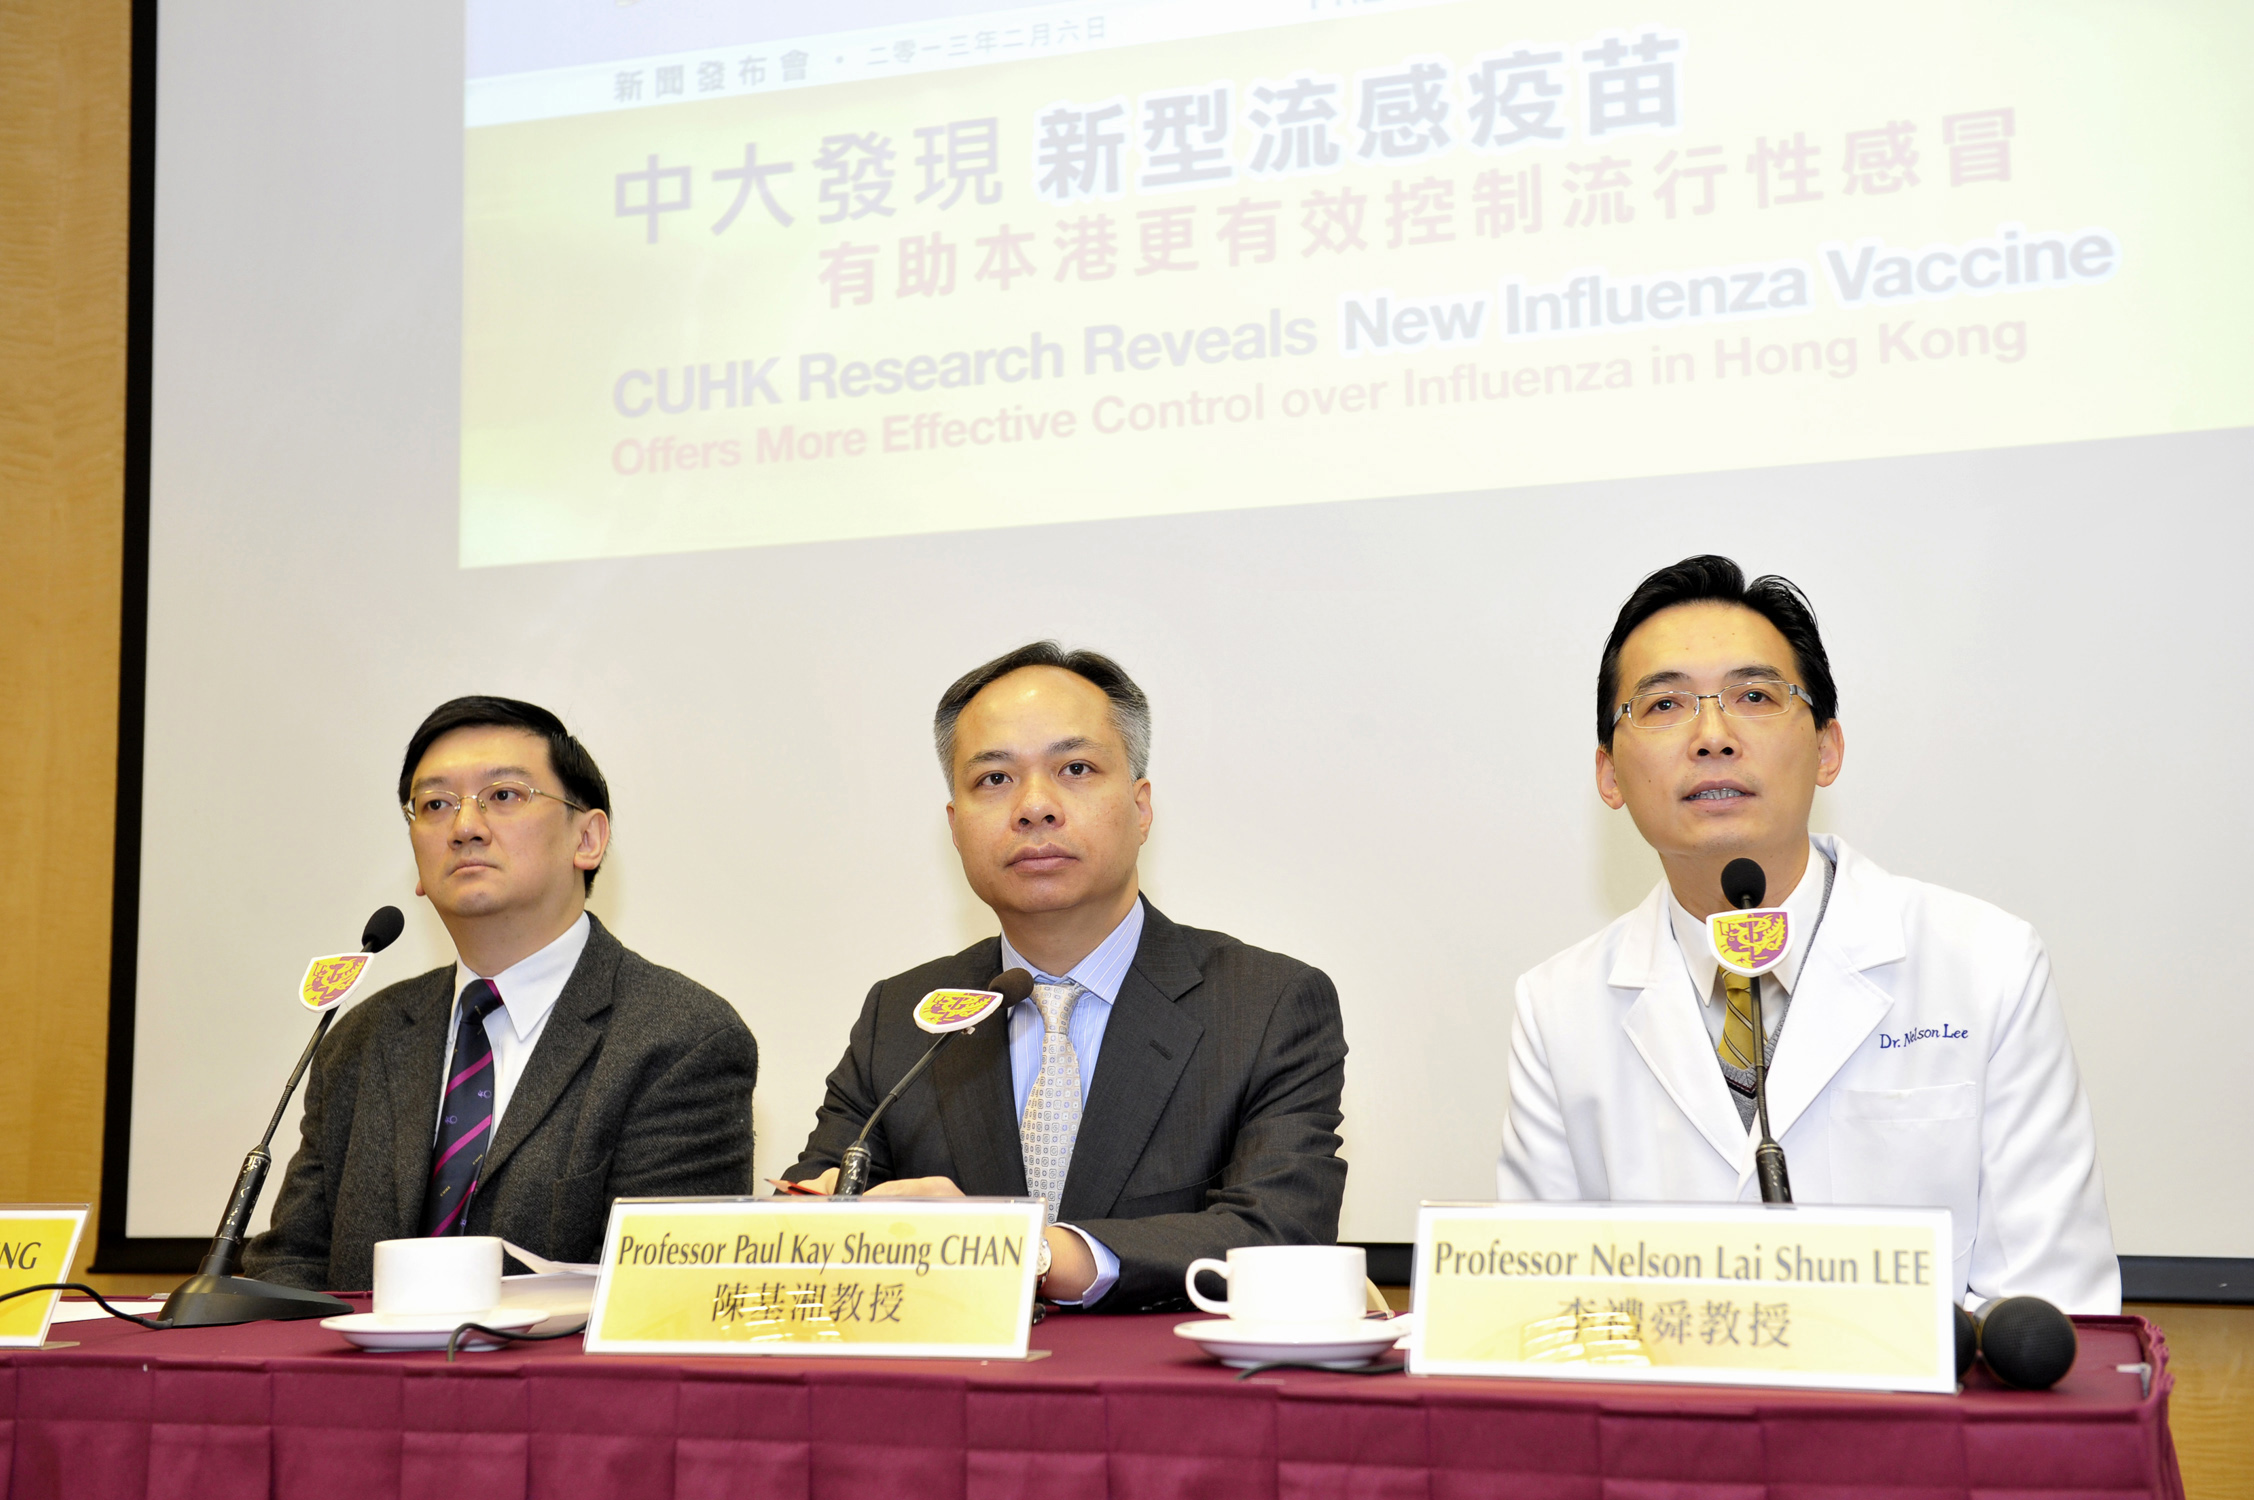 (From left) Professor Ting Fan LEUNG, Professor, Department of Paediatrics;　Professor Paul Kay Sheung CHAN, Chairman, Department of Microbiology; Professor Nelson Lai Shun LEE, Head, Division of Infectious Diseases, Department of Medicine and Therapeutics at CUHK present the joint recent research on how the new influenza vaccine offers more effective control over influenza in Hong Kong